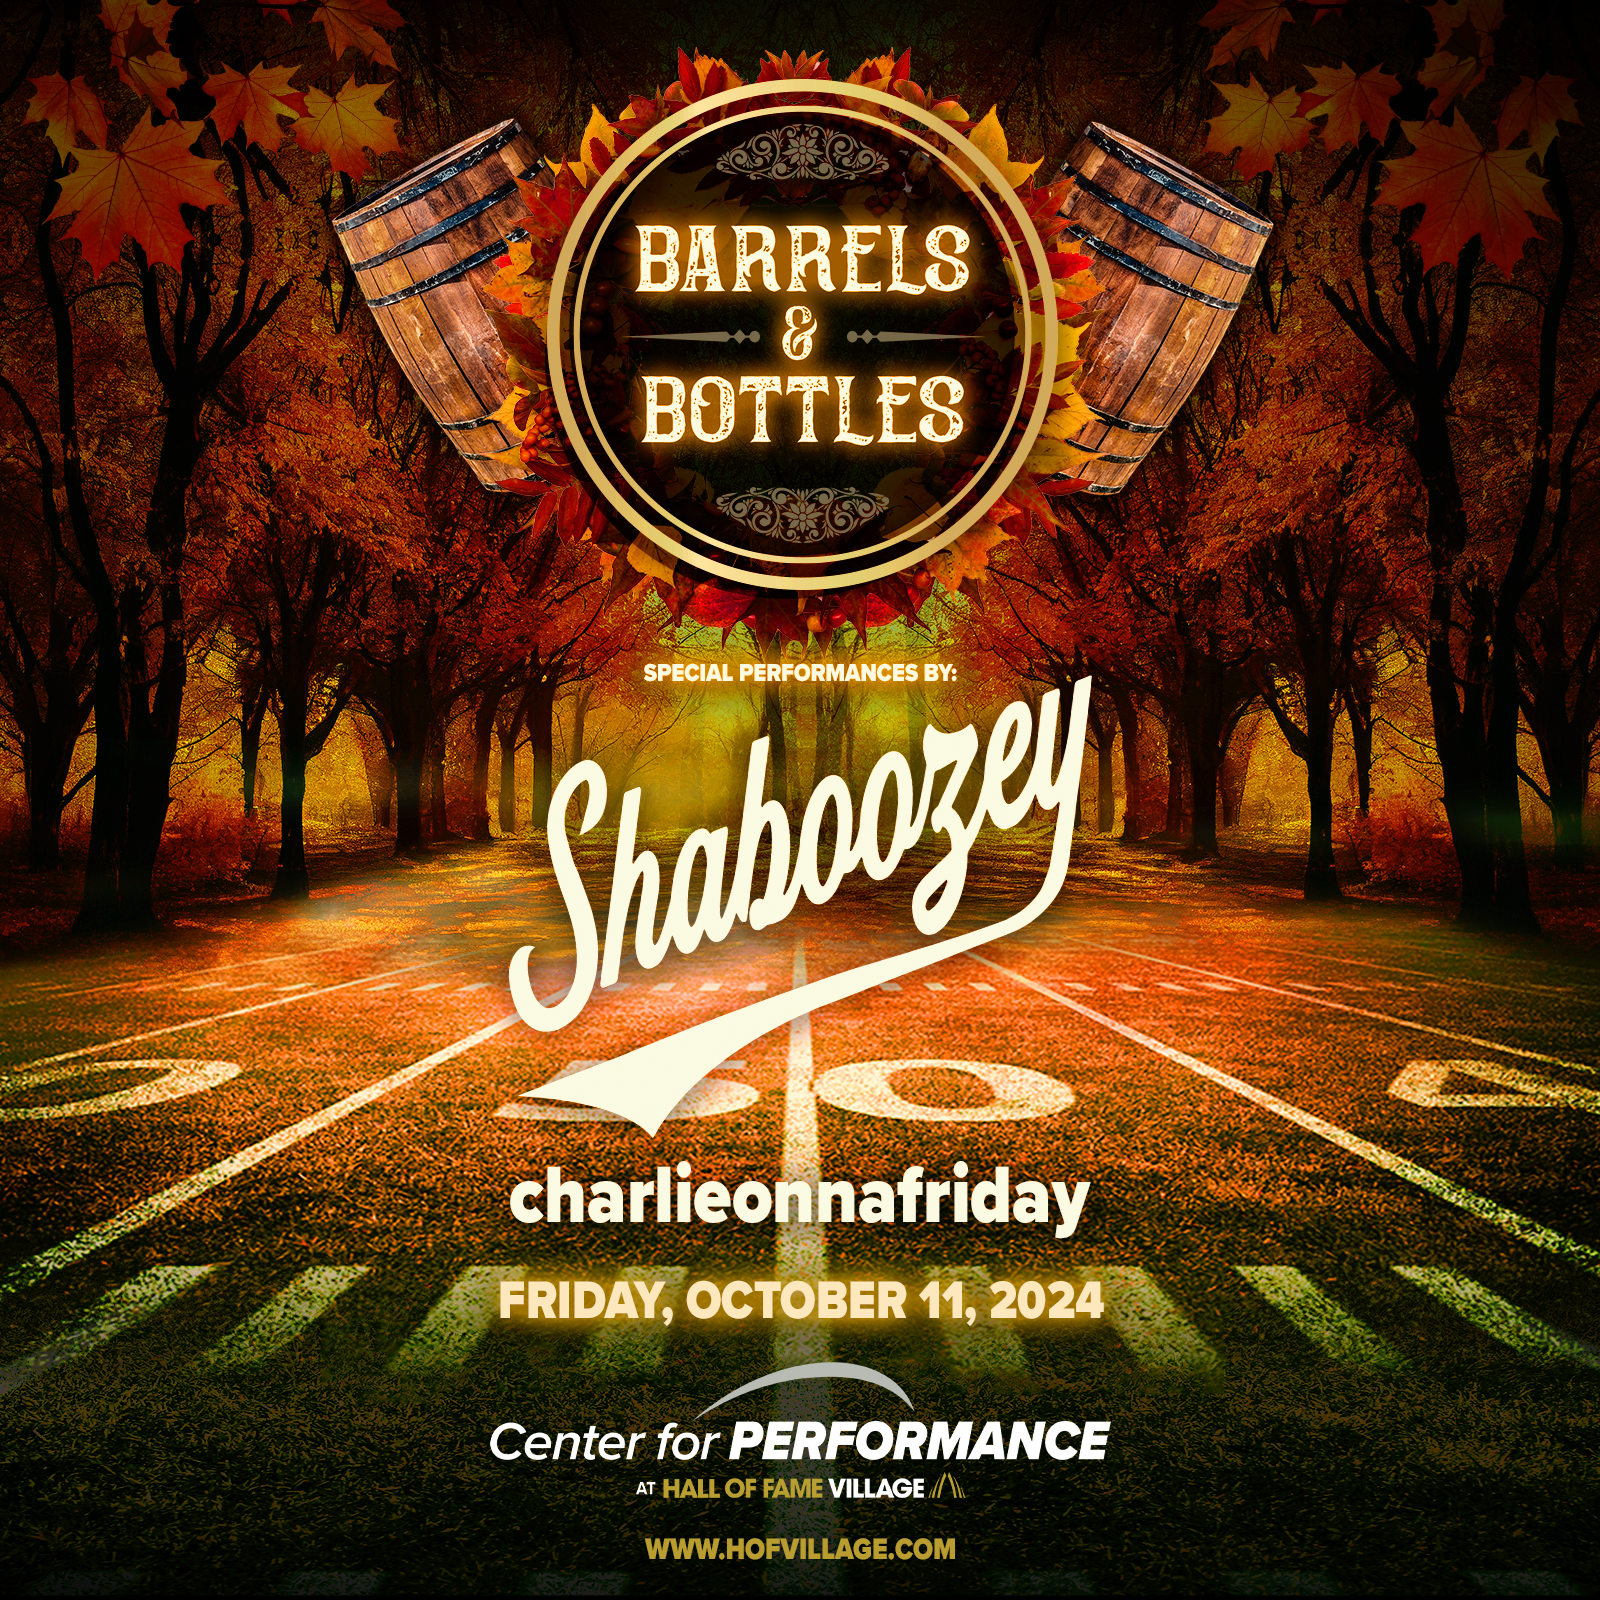 Barrels & Bottles: Special Performances by Shaboozey and charlieonnafriday at Hall of Fame Village on October 11